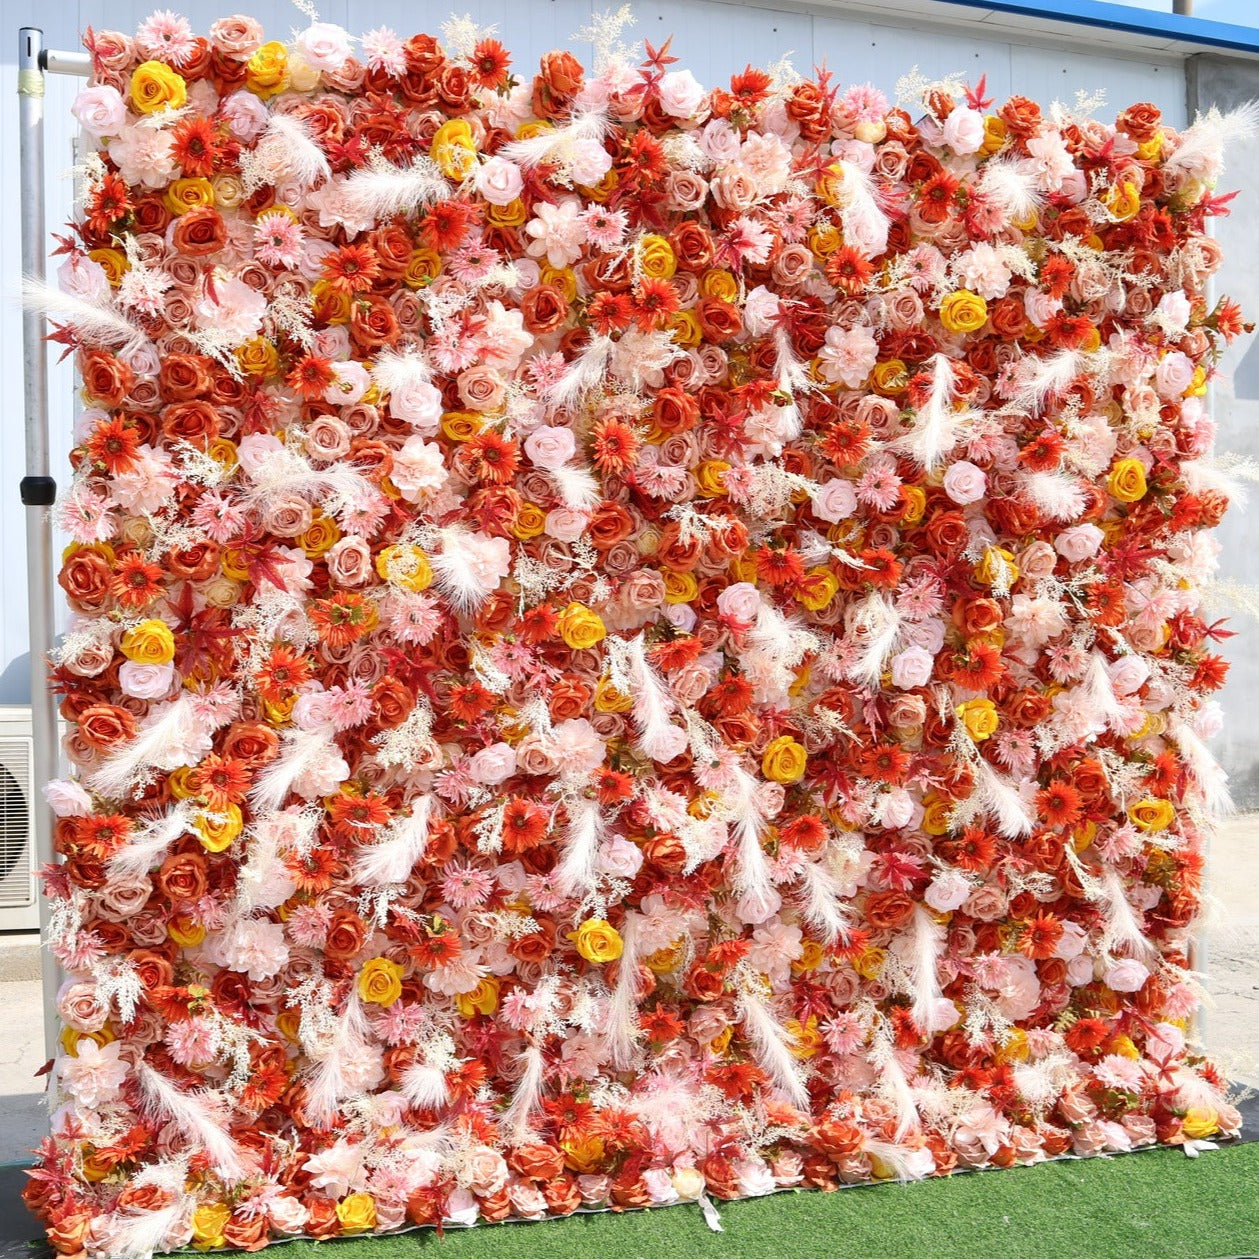 Flower Wall Fall Bright Orange Rose Rolling Up Curtain Floral Backdrop Wedding Party Proposal Decor